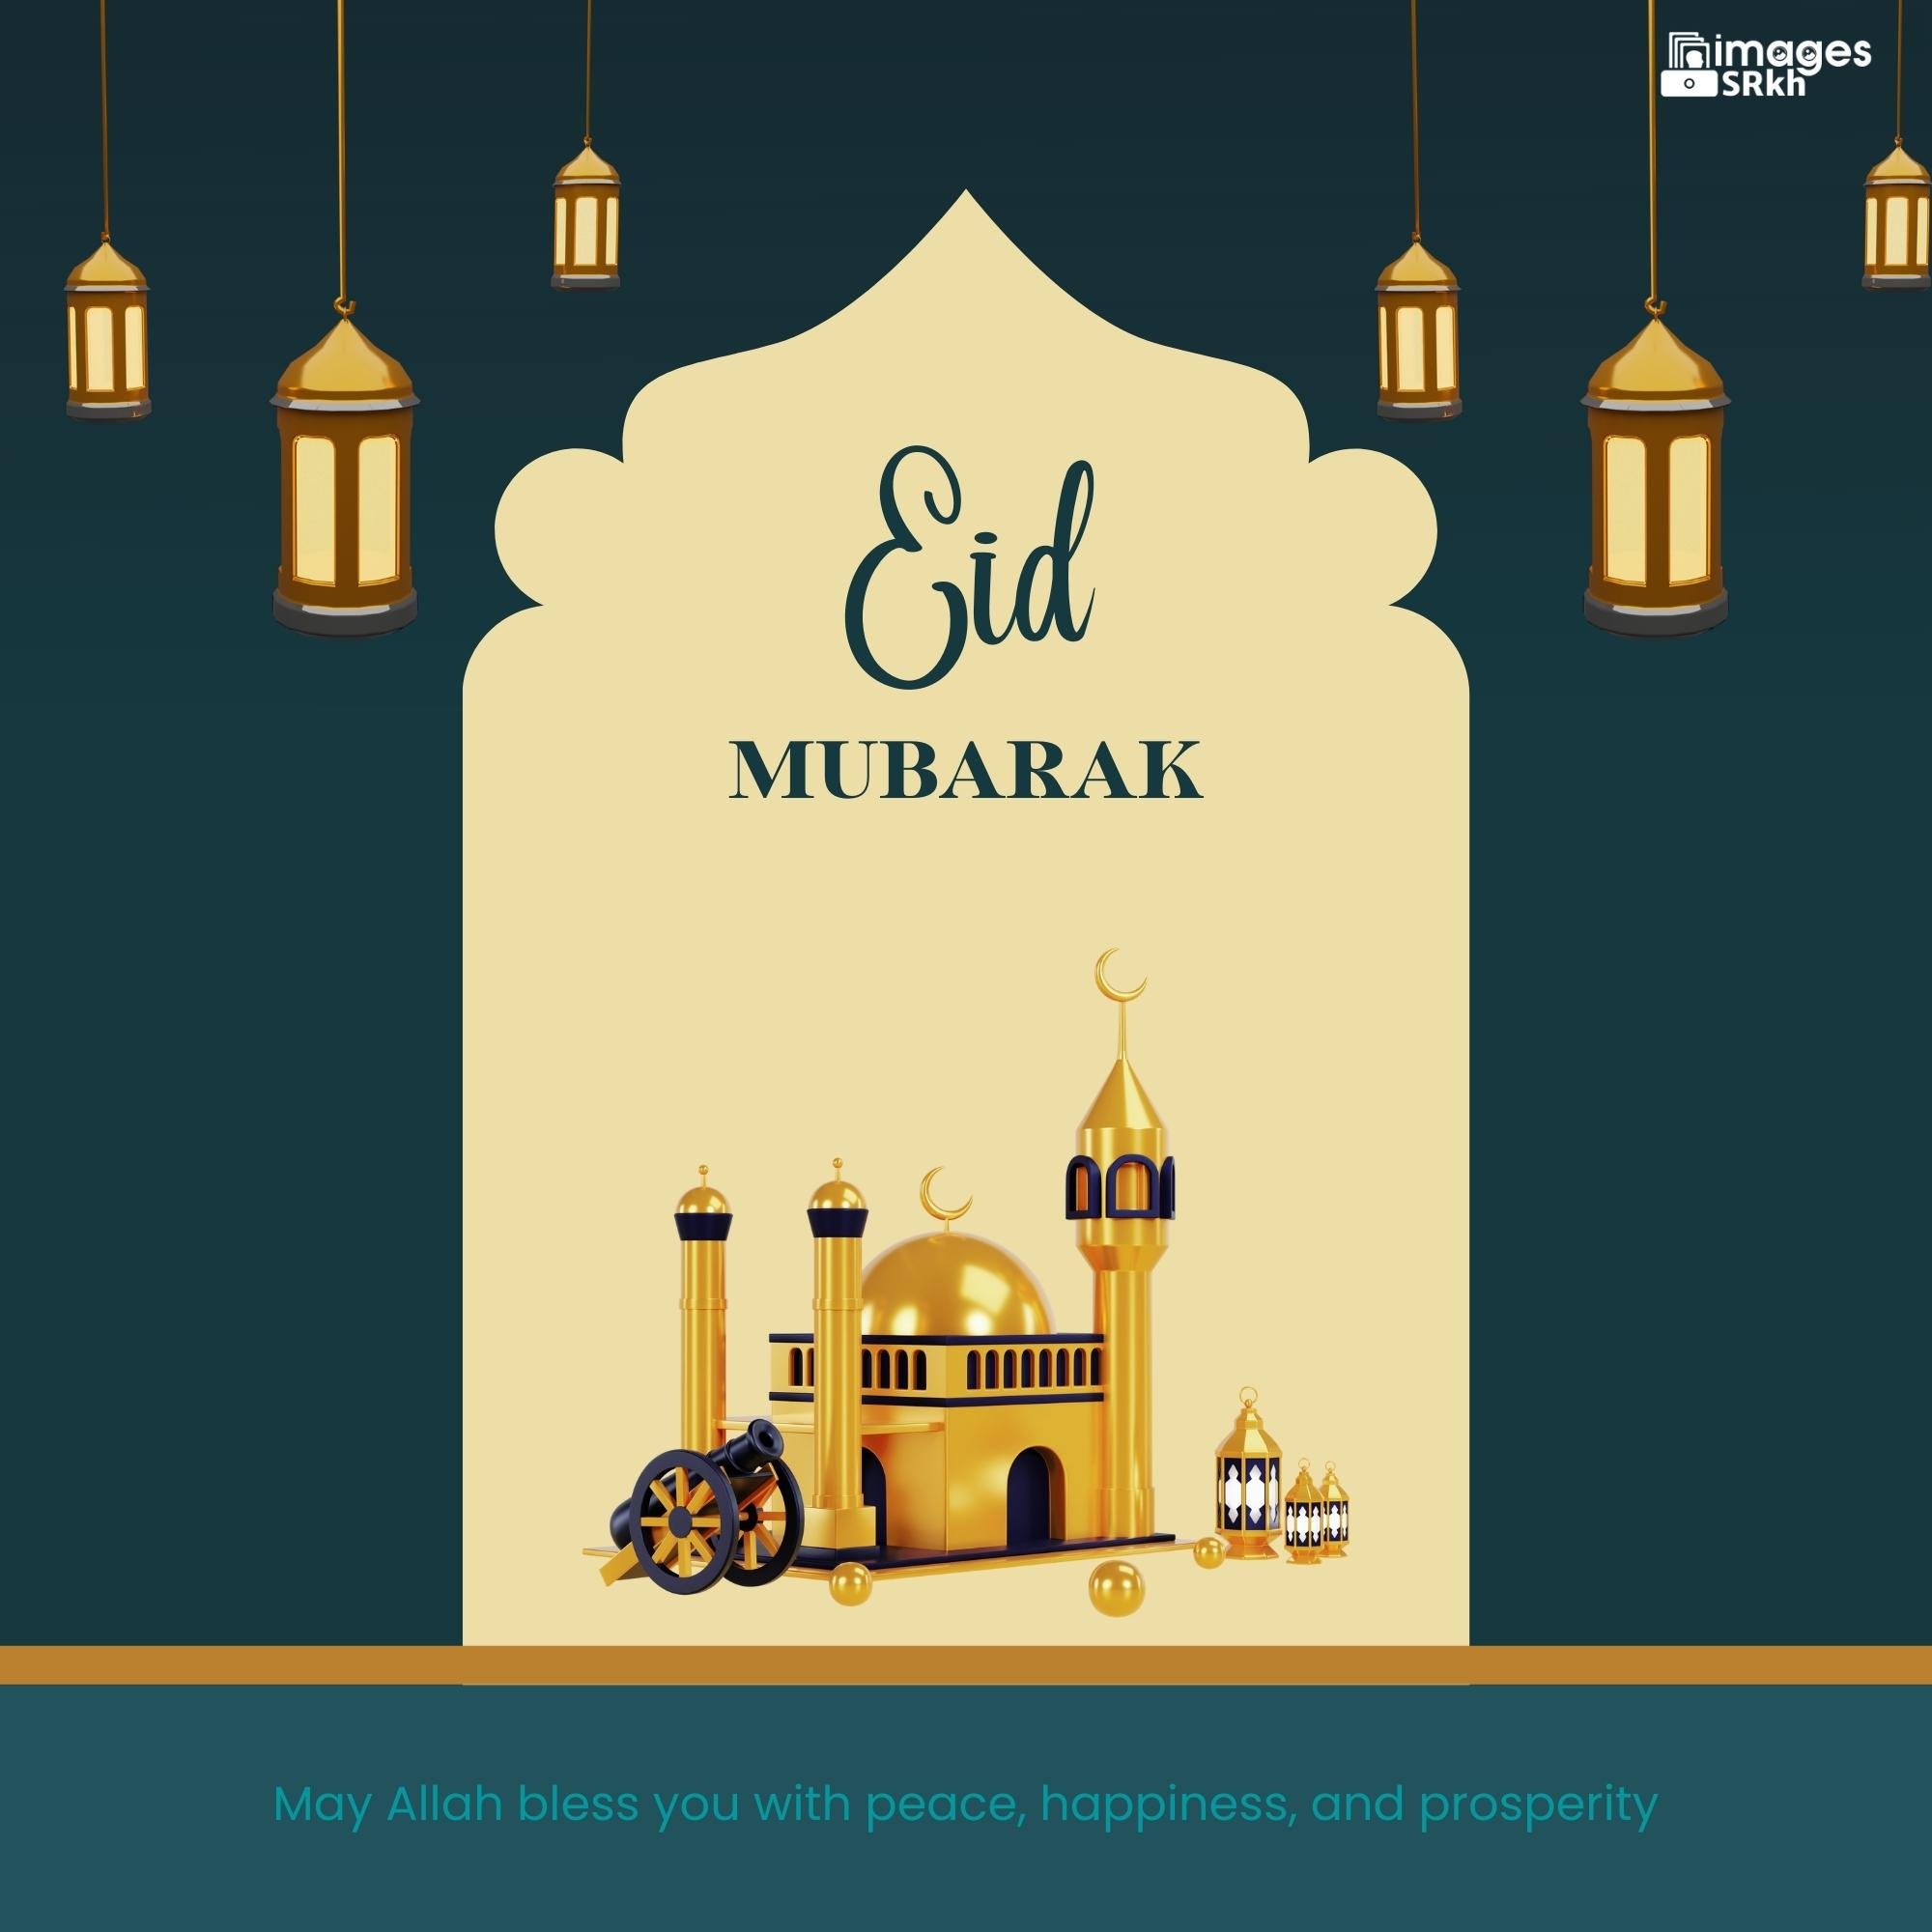 Quotation Of Eid Mubarak | Download free in Hd Quality | imagesSRkh